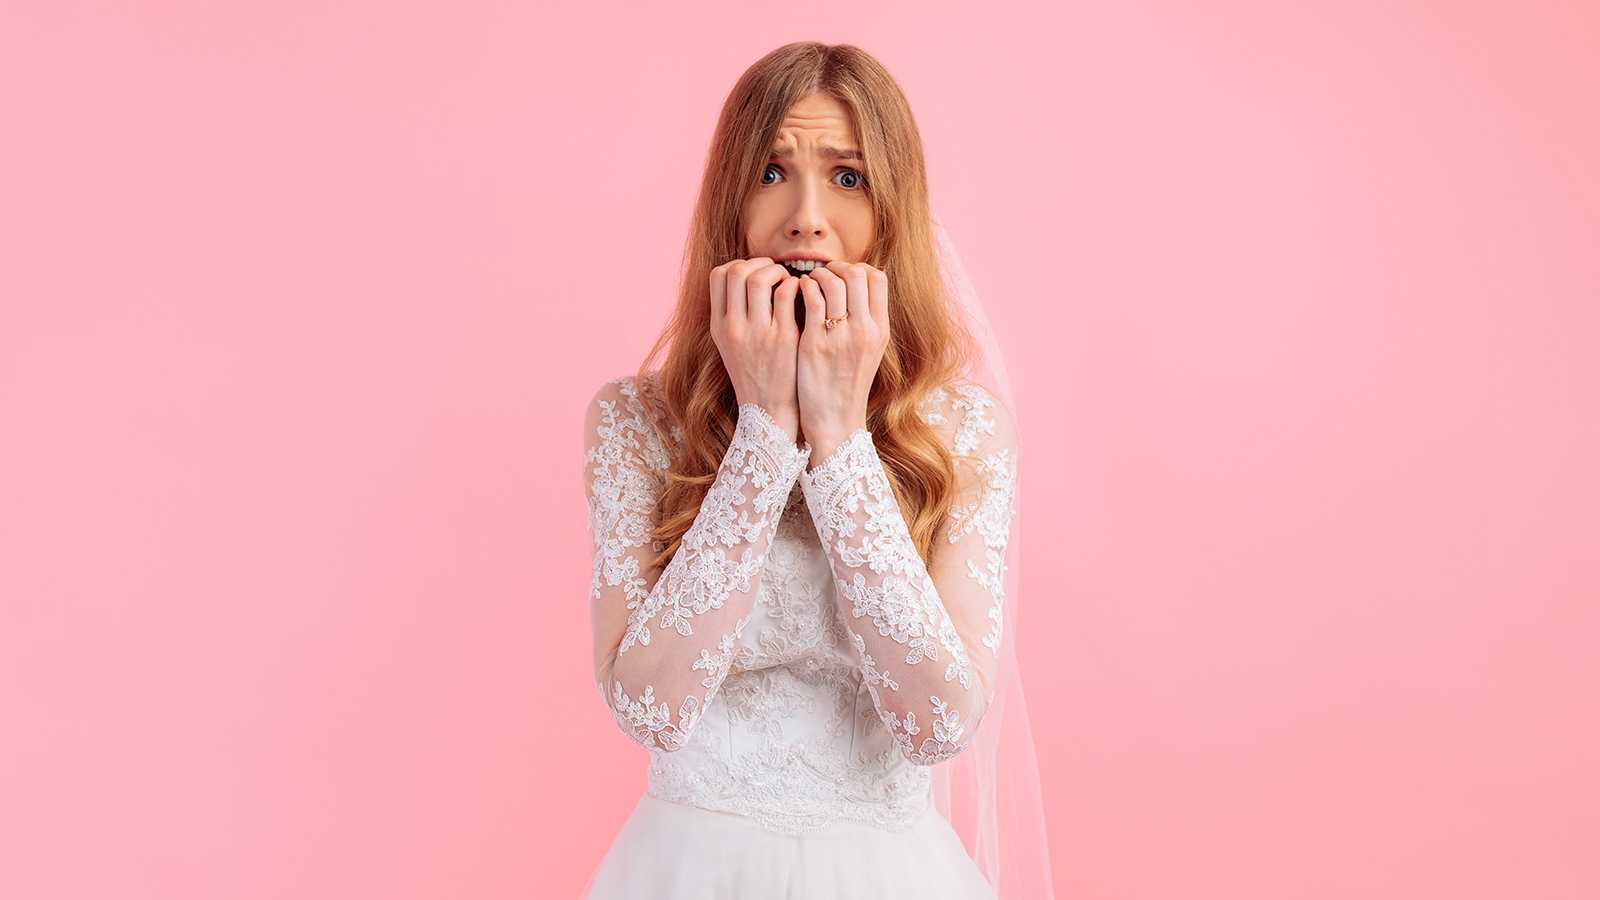 A frightened bride in a wedding dress and with a bouquet of flowers, holding her hands to her mouth in fear on a pink background